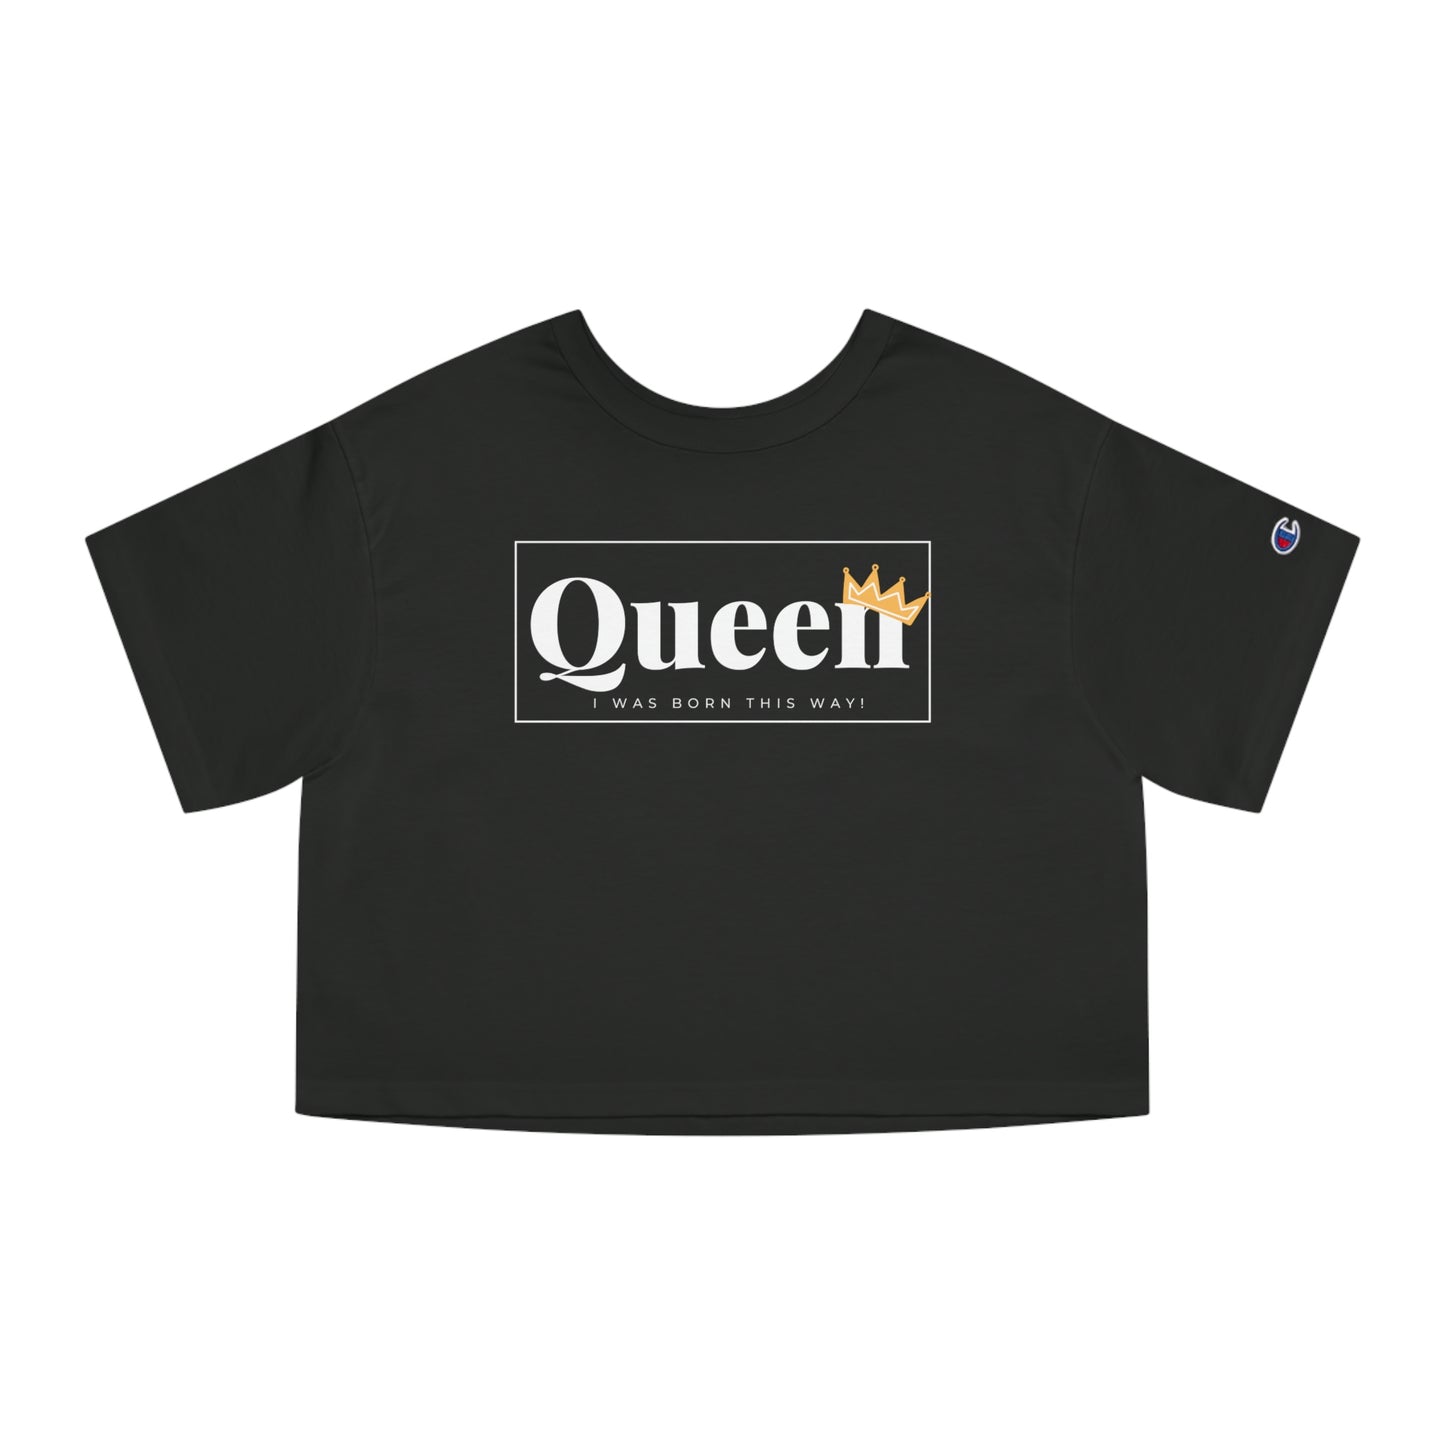 She Is Queen Champion Women's Heritage Cropped T-Shirt